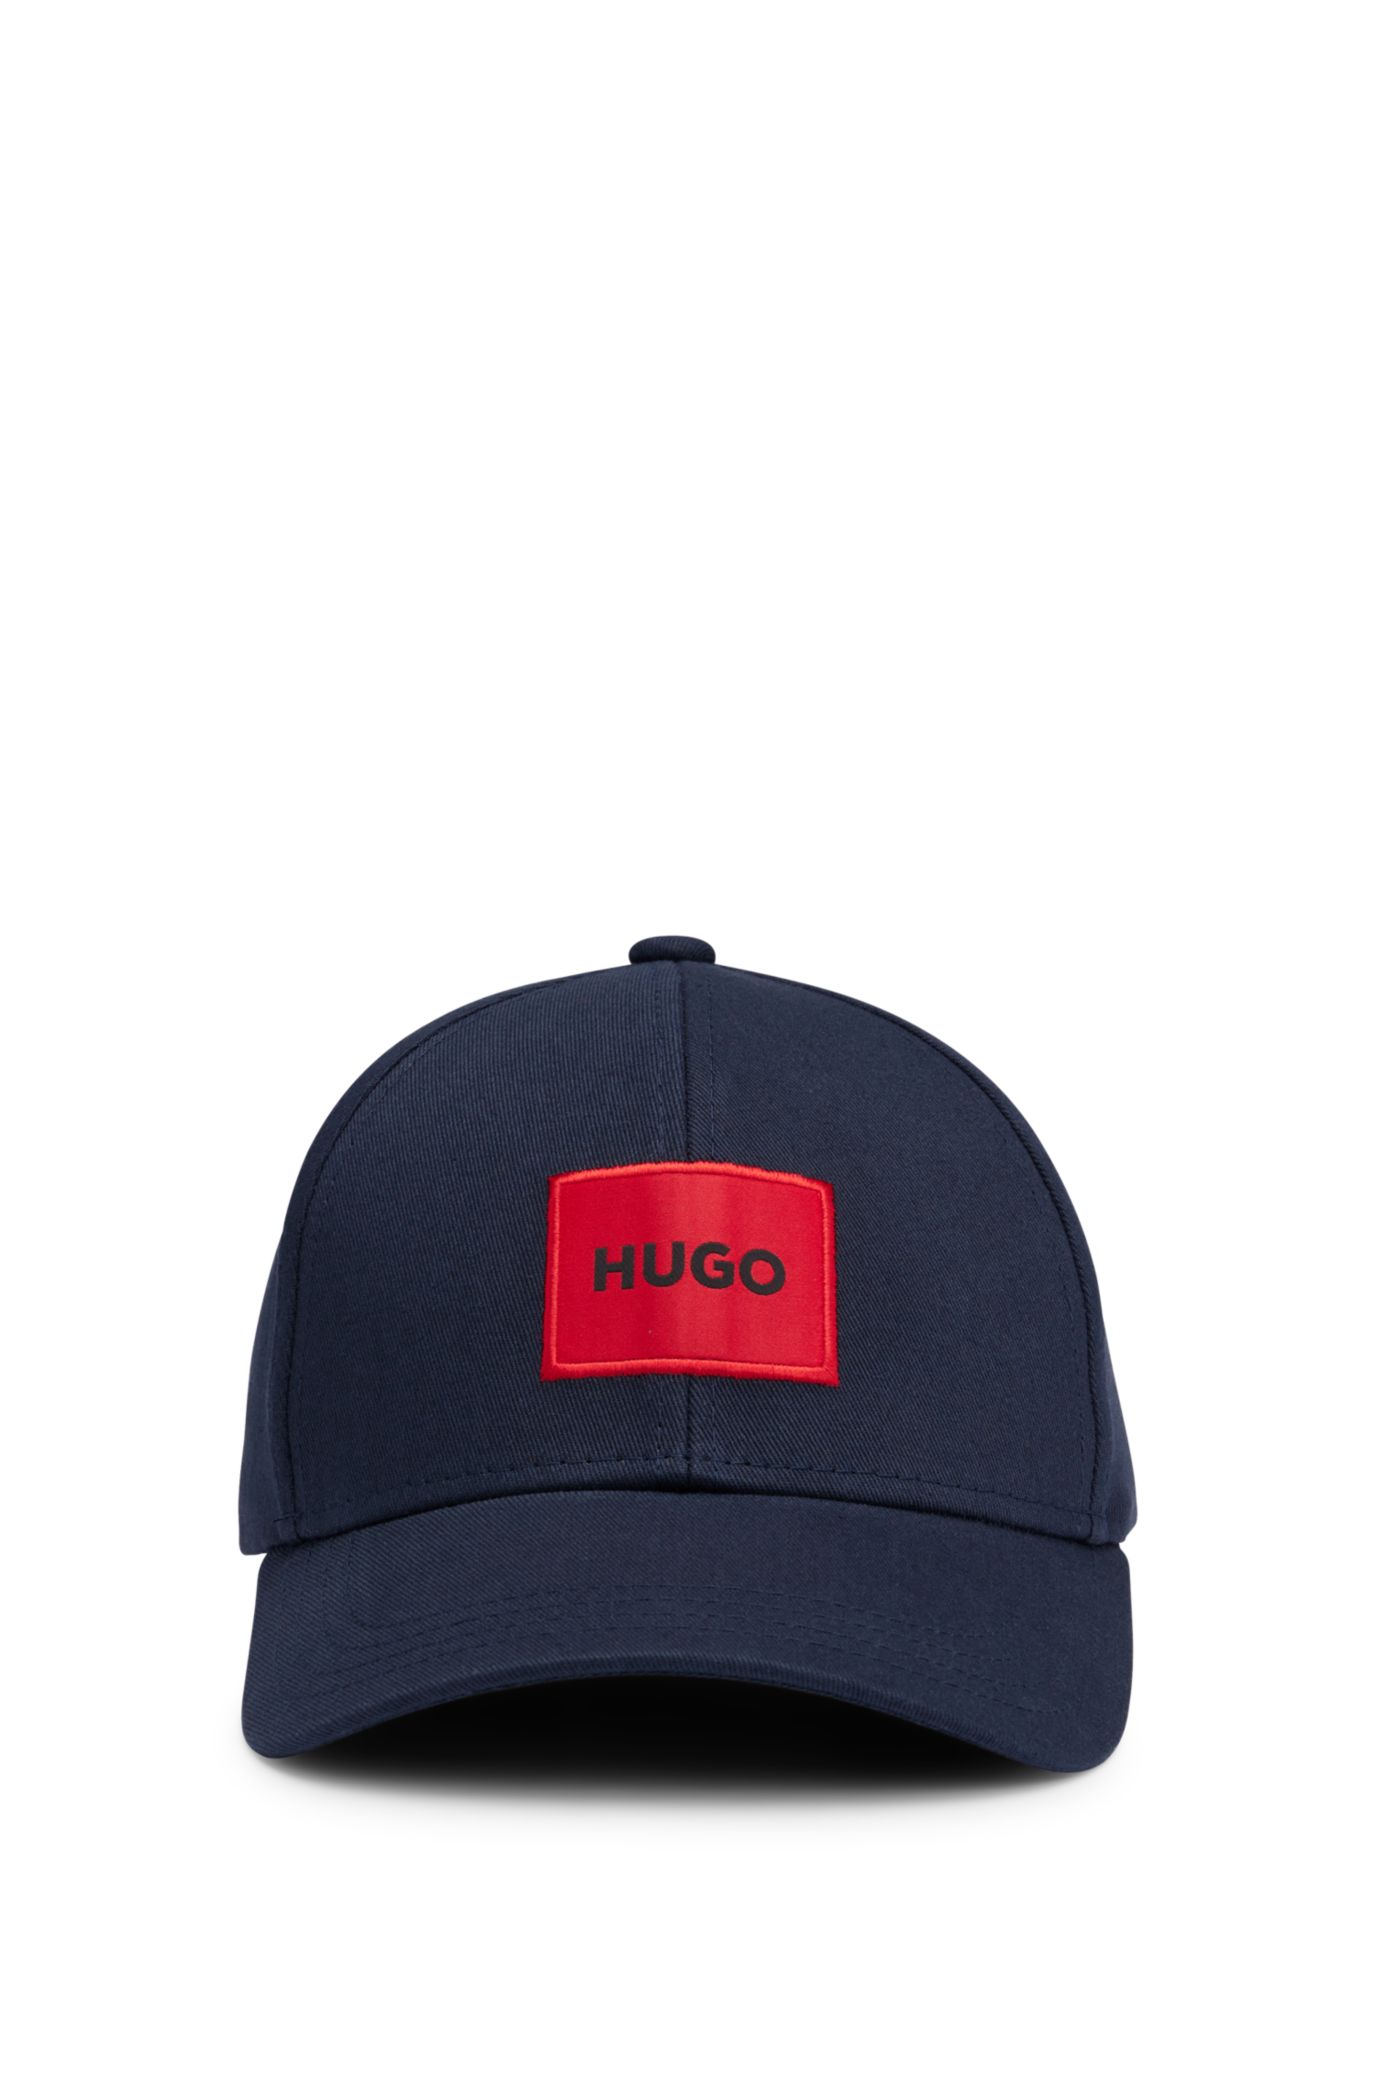 HUGO - Cotton-twill label red with cap logo